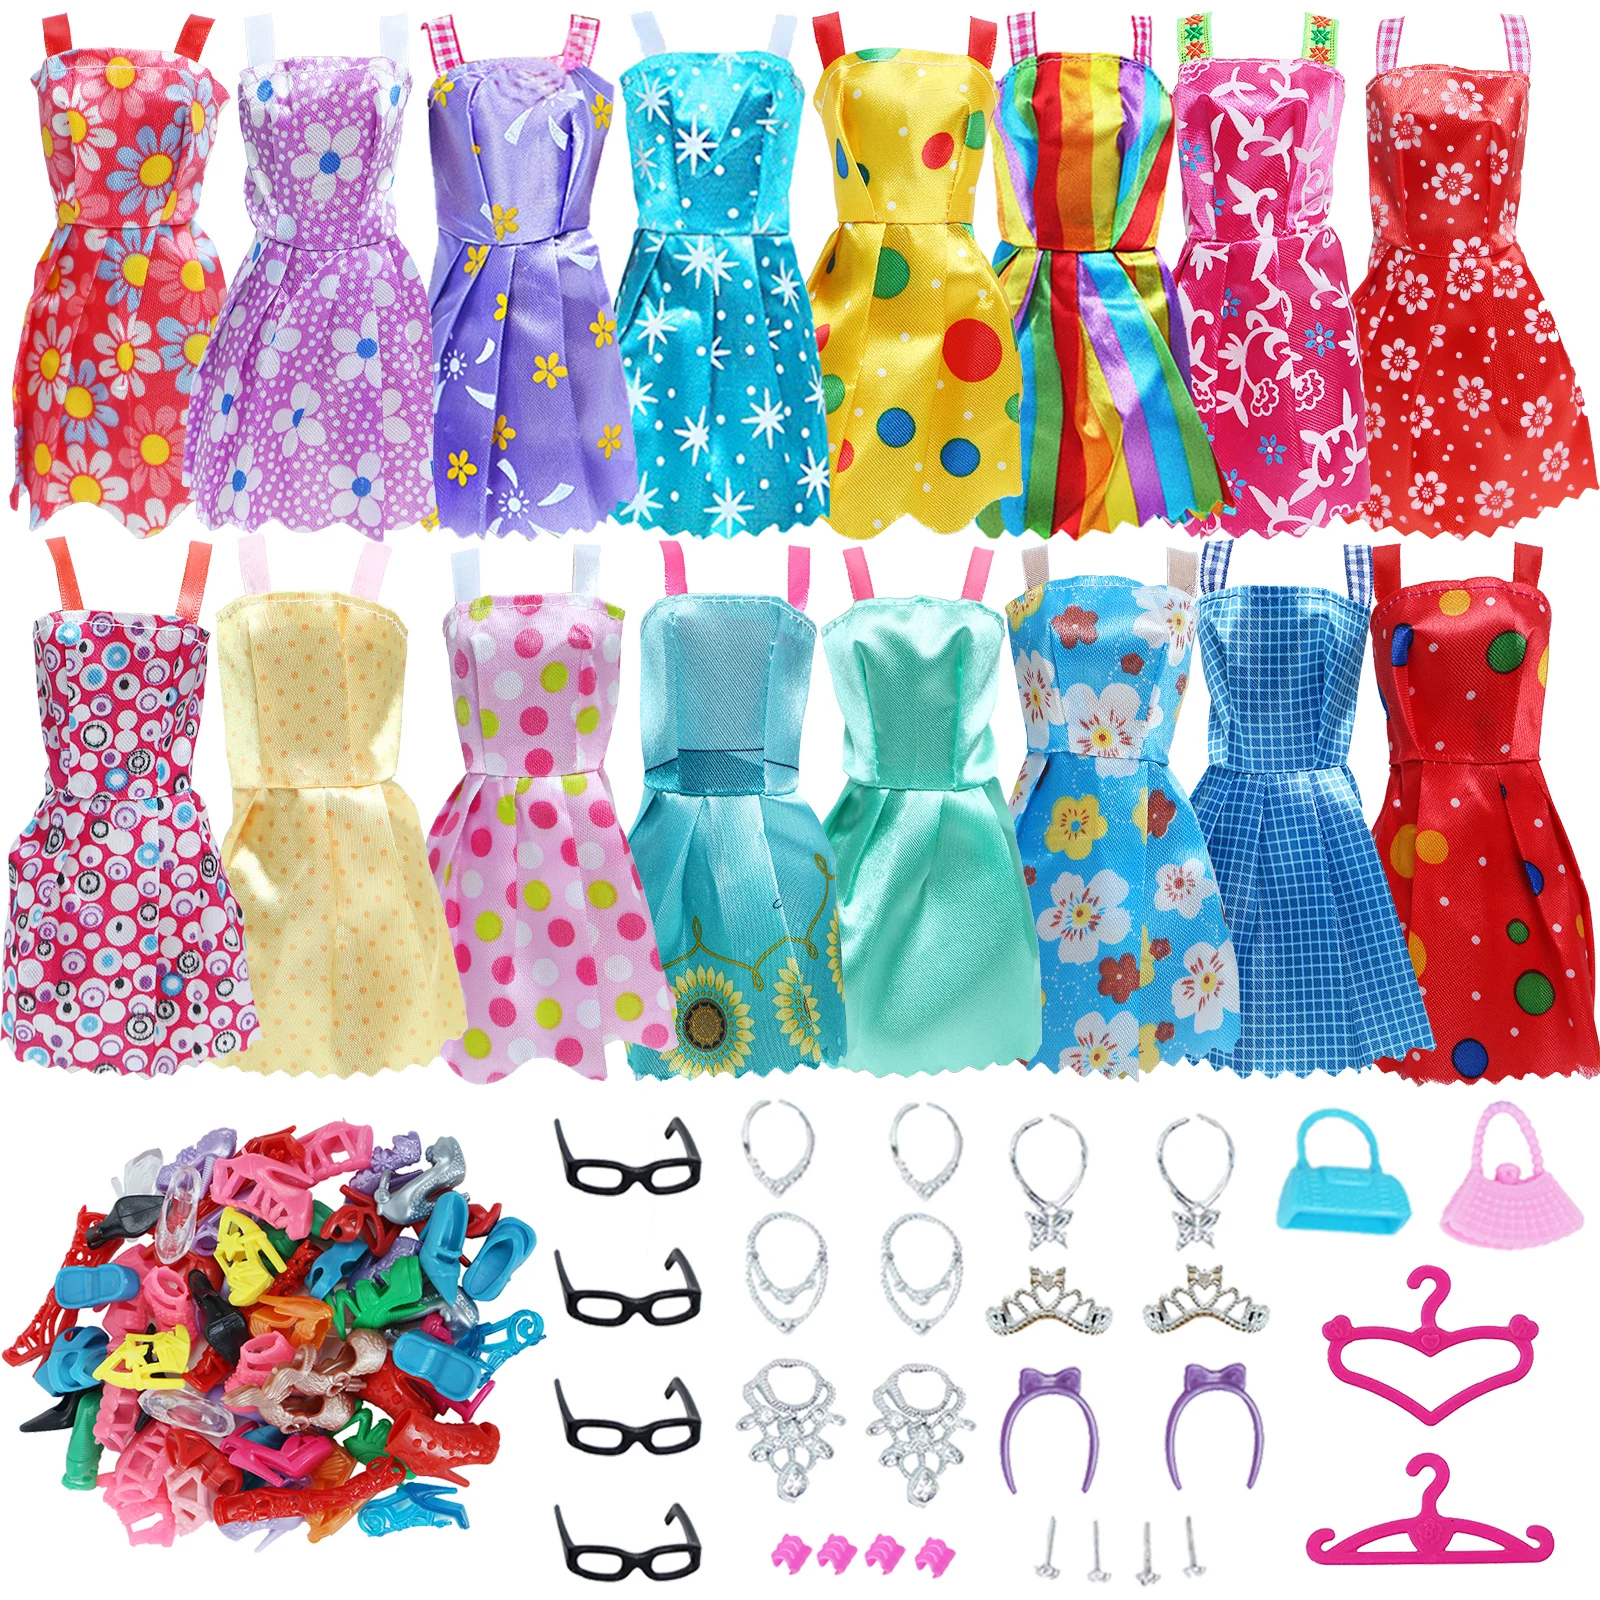 Hot 20 PairsTransparent Barbie ShoesTrendy Assorted Accessories For Barbie Doll